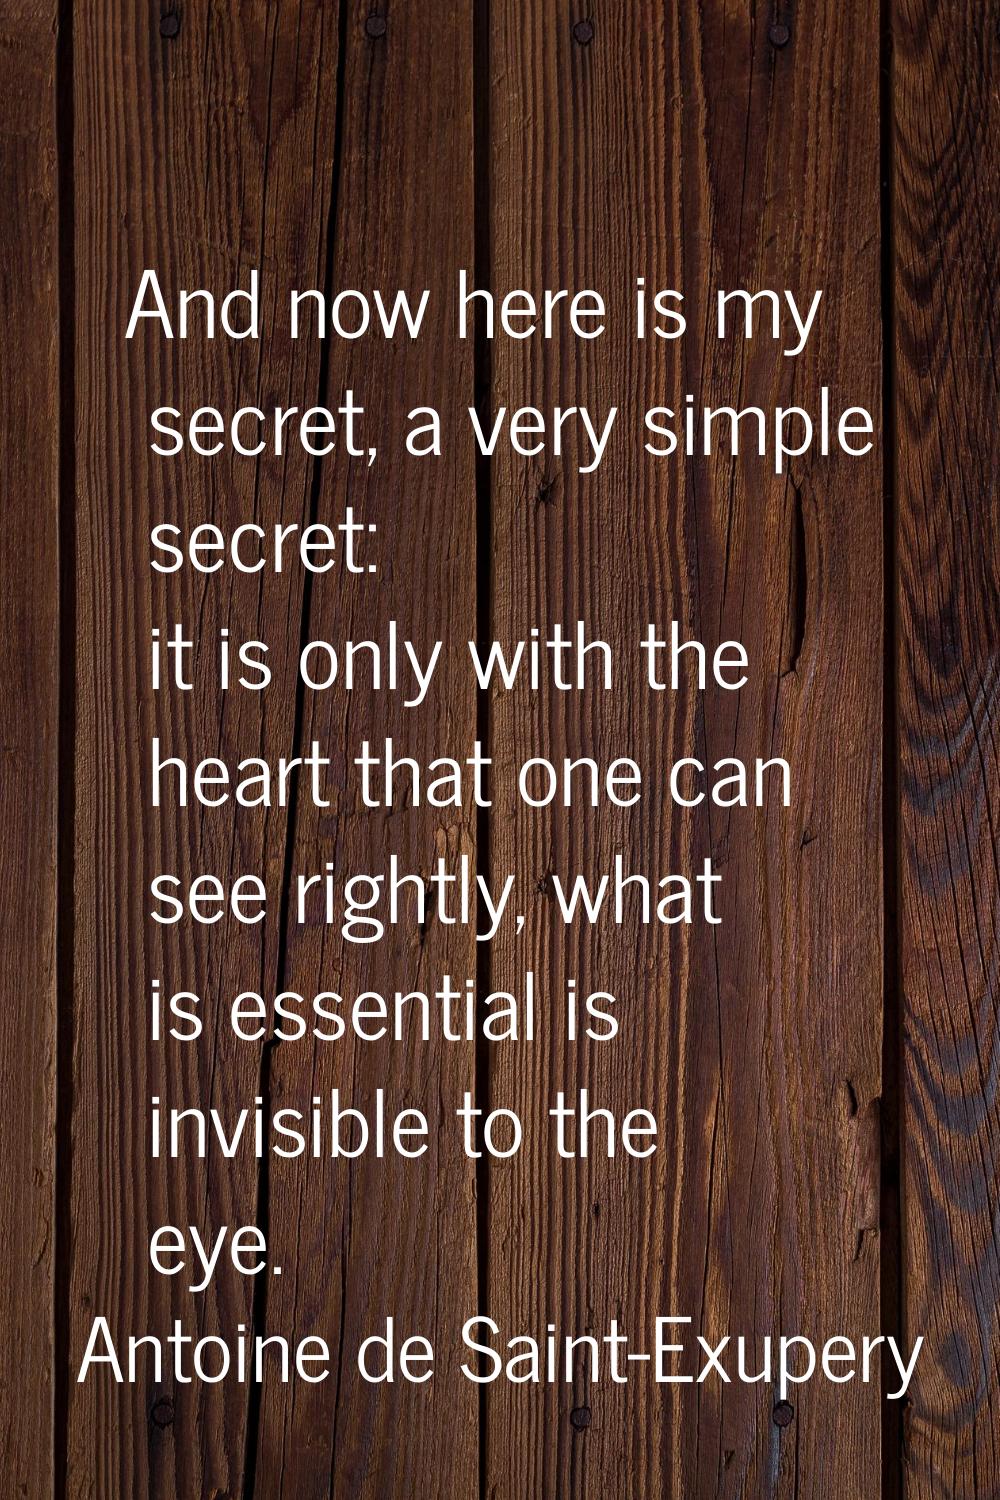 And now here is my secret, a very simple secret: it is only with the heart that one can see rightly